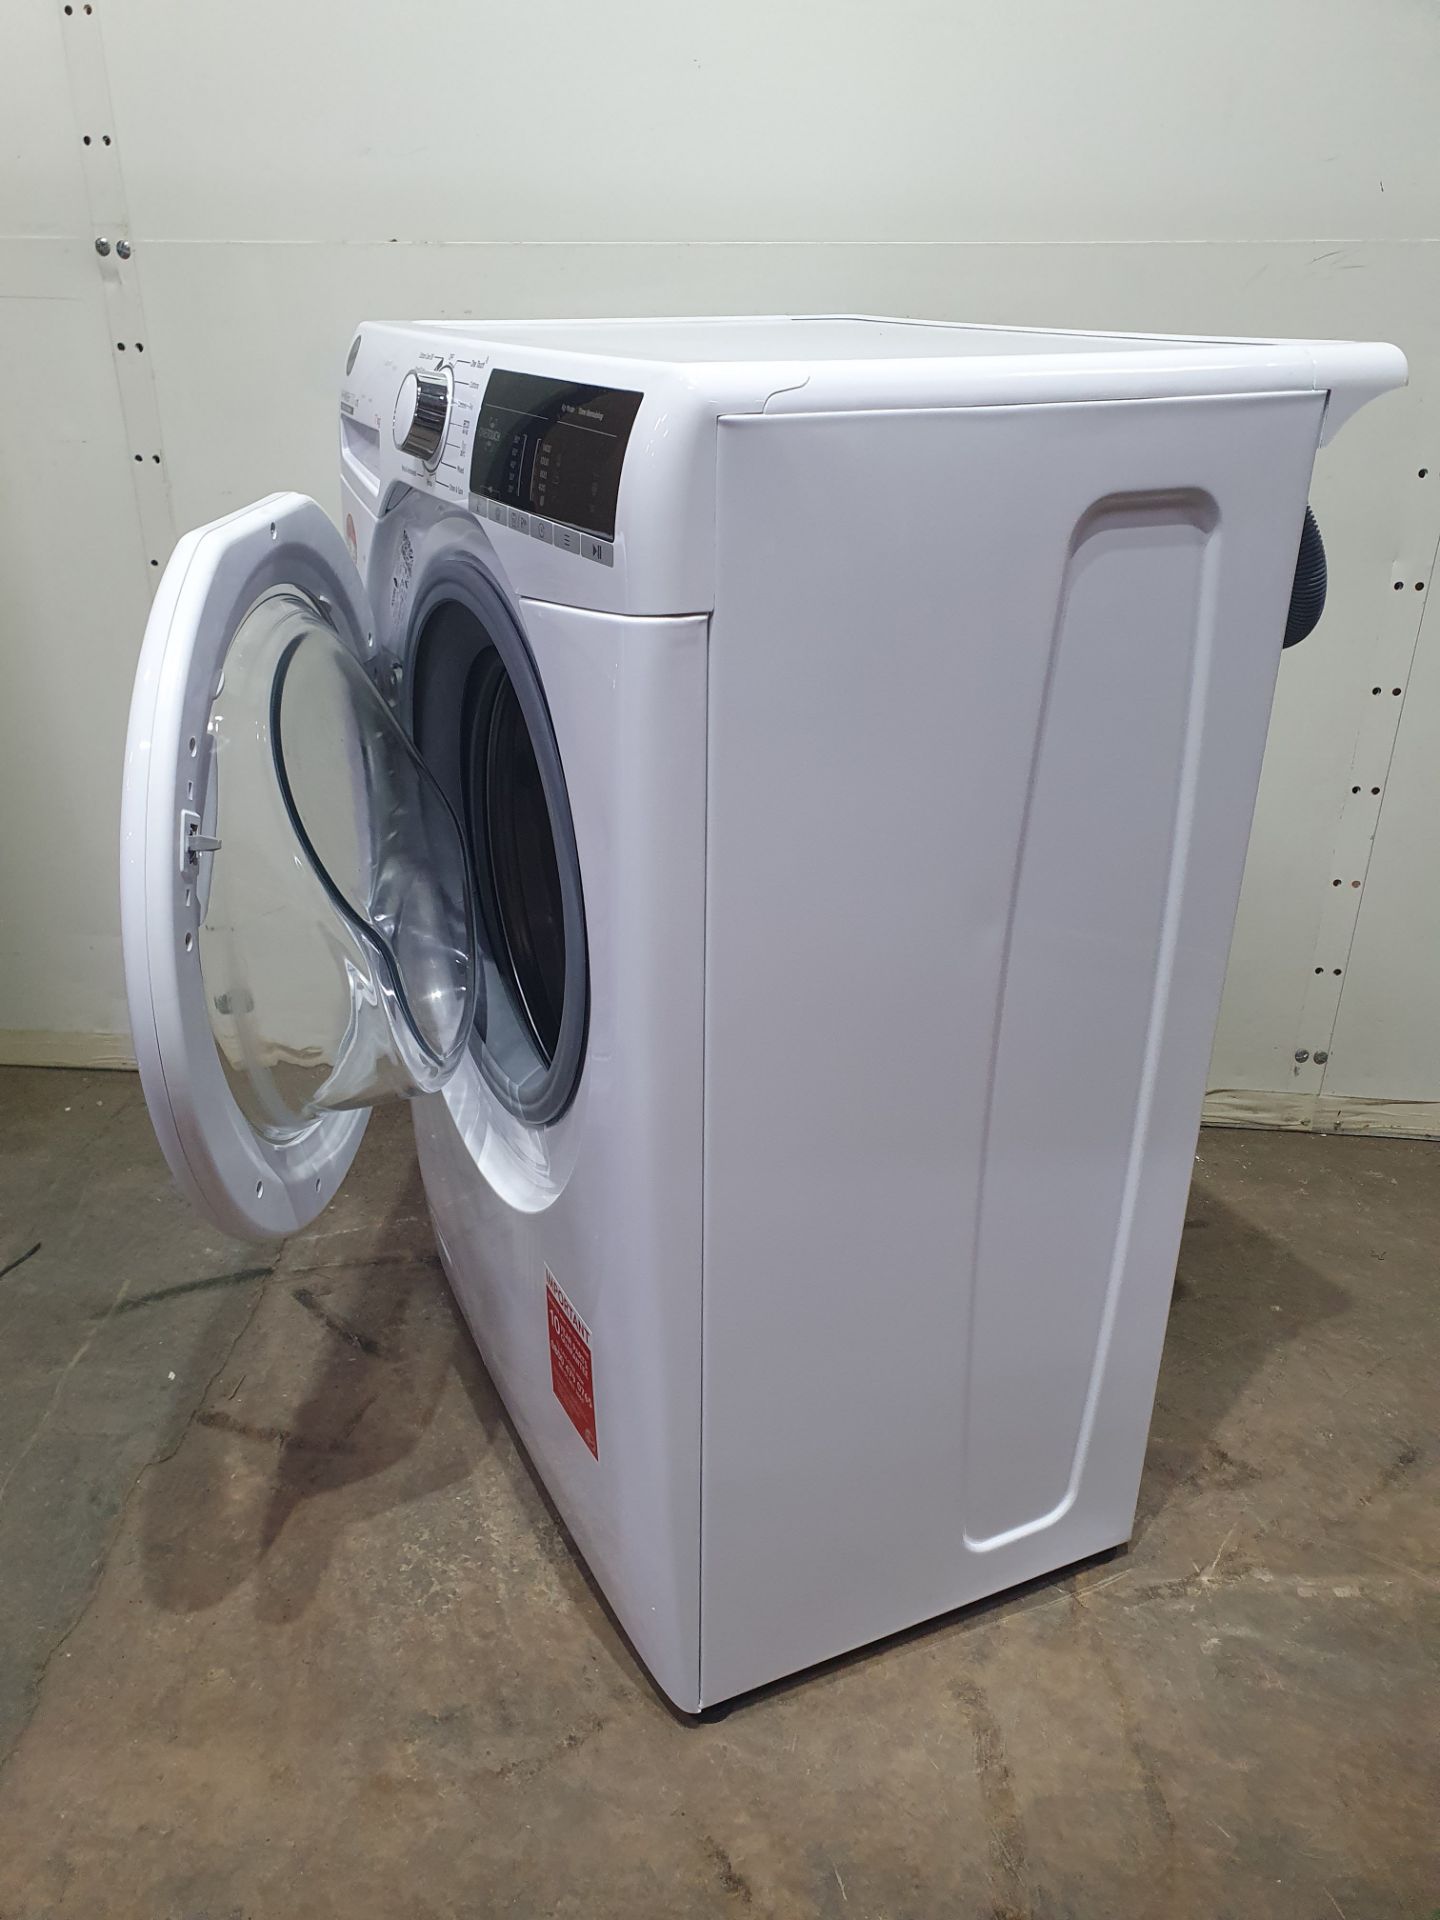 Ex-Display Hoover H3W47TE 7kg 1400 Spin Washing Machine with NFC Connection - White - Image 6 of 7